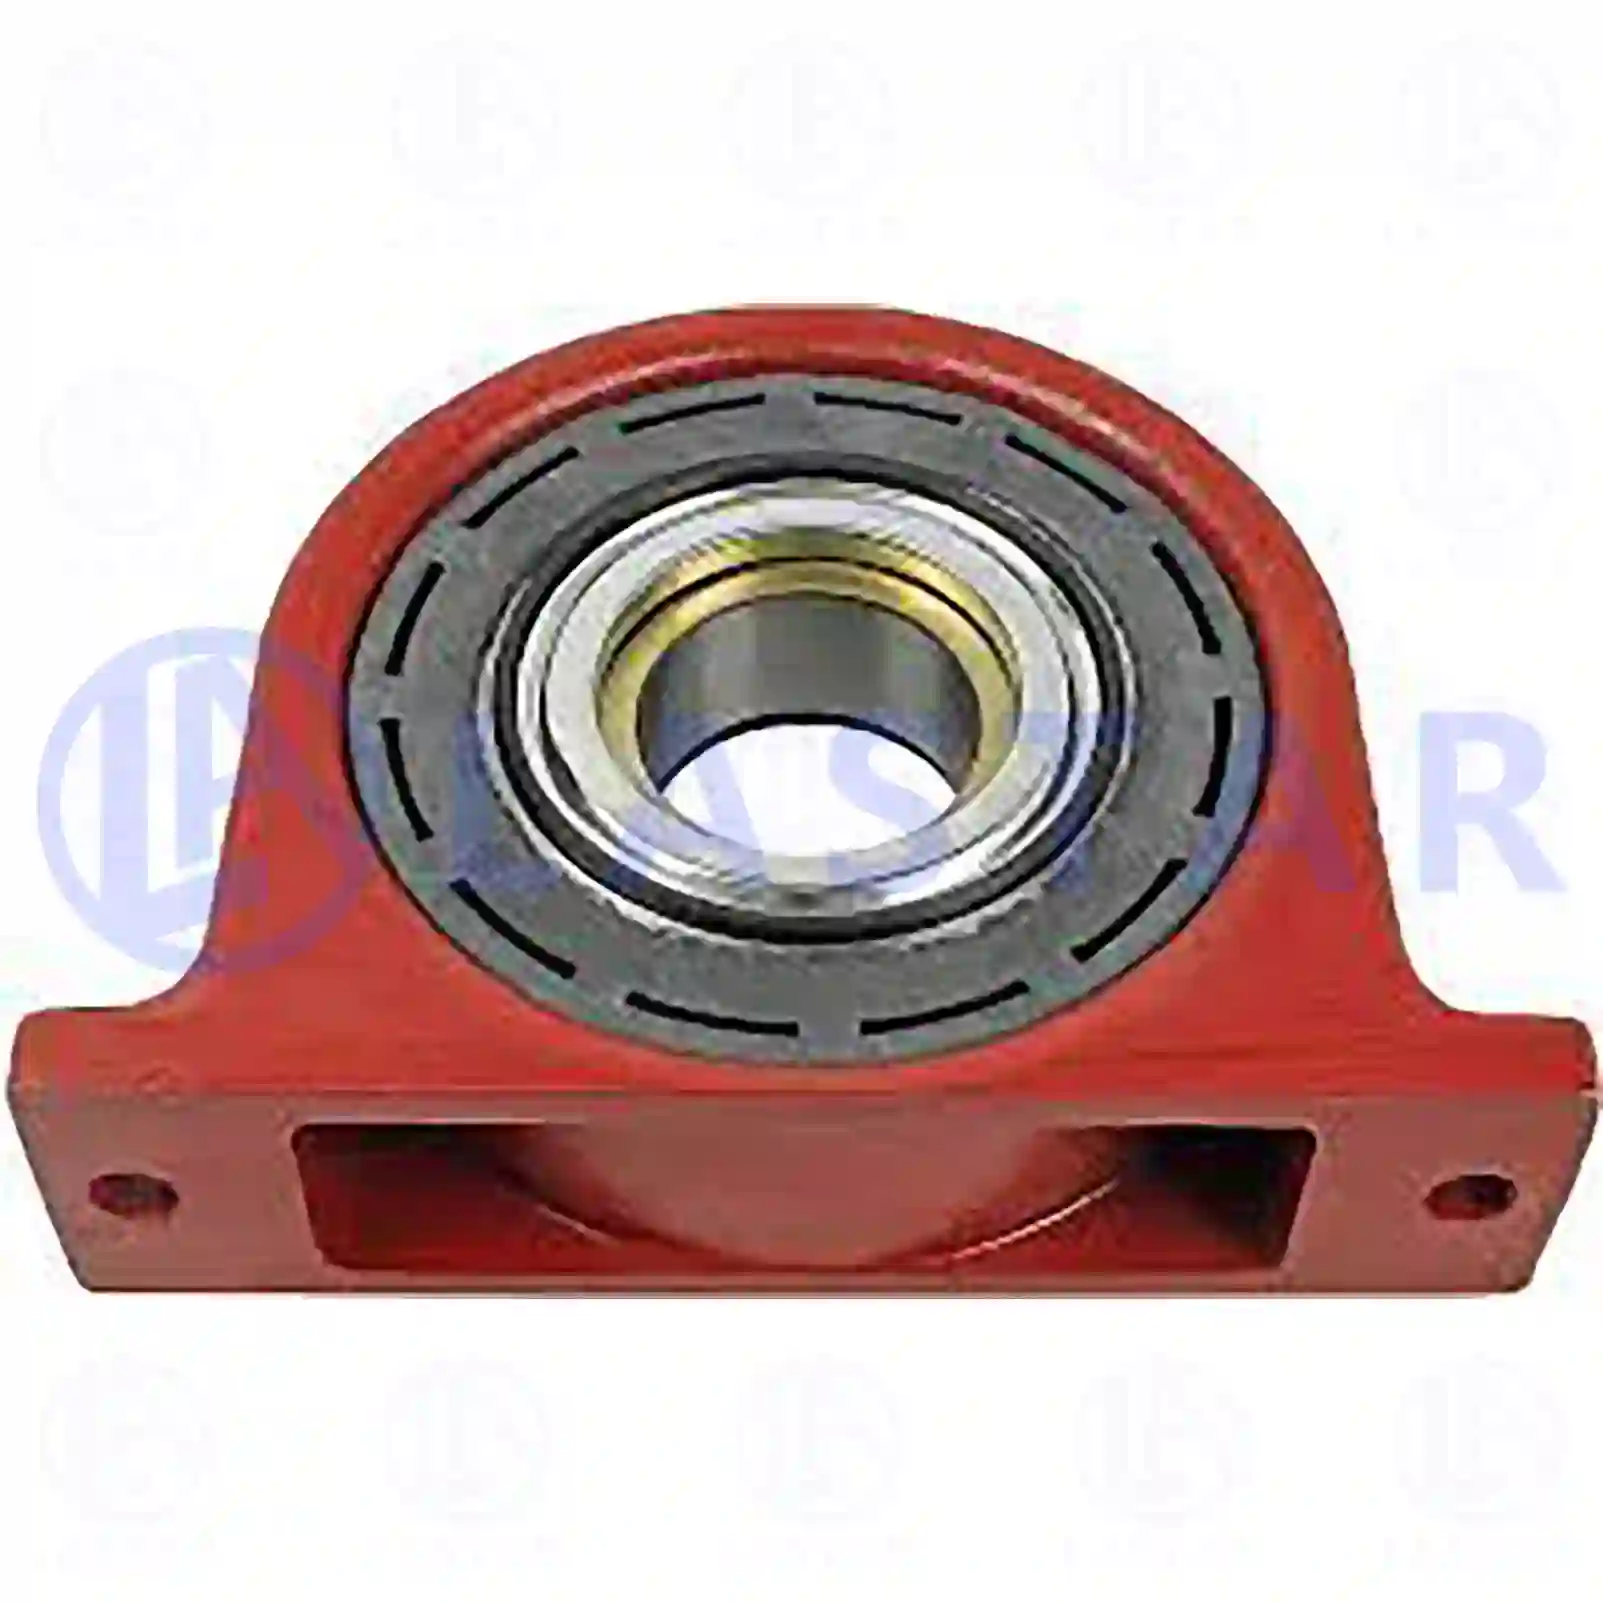 Support Bearing Center bearing, la no: 77734350 ,  oem no:42536961, 9315762 Lastar Spare Part | Truck Spare Parts, Auotomotive Spare Parts